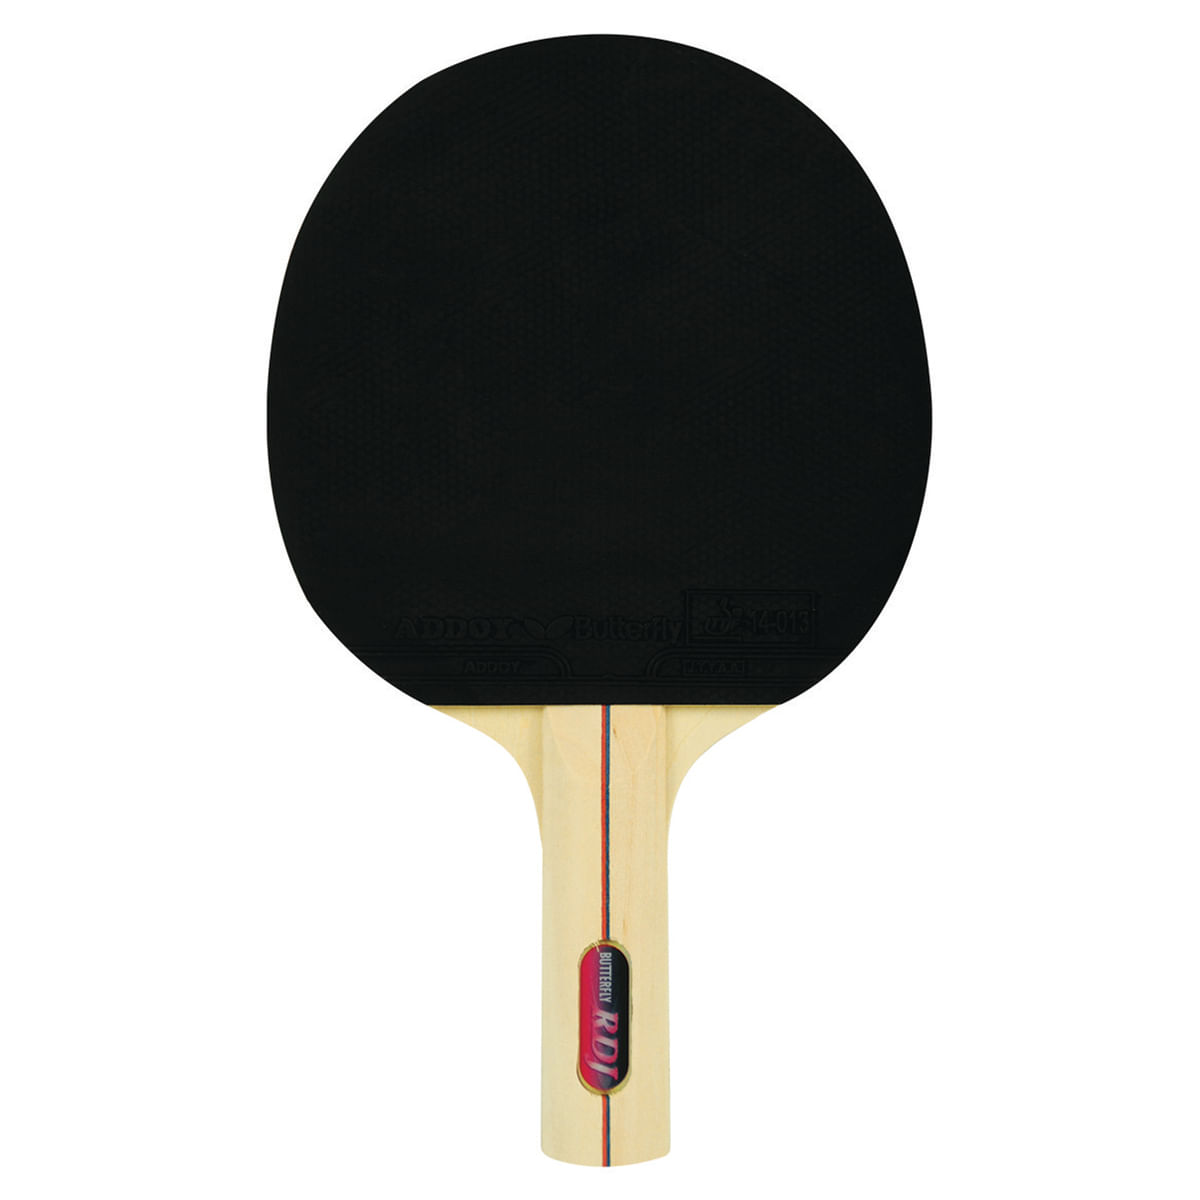 Butterfly Table Tennis 4 PLAYER SET 51 51 100 4 PLAYER SET